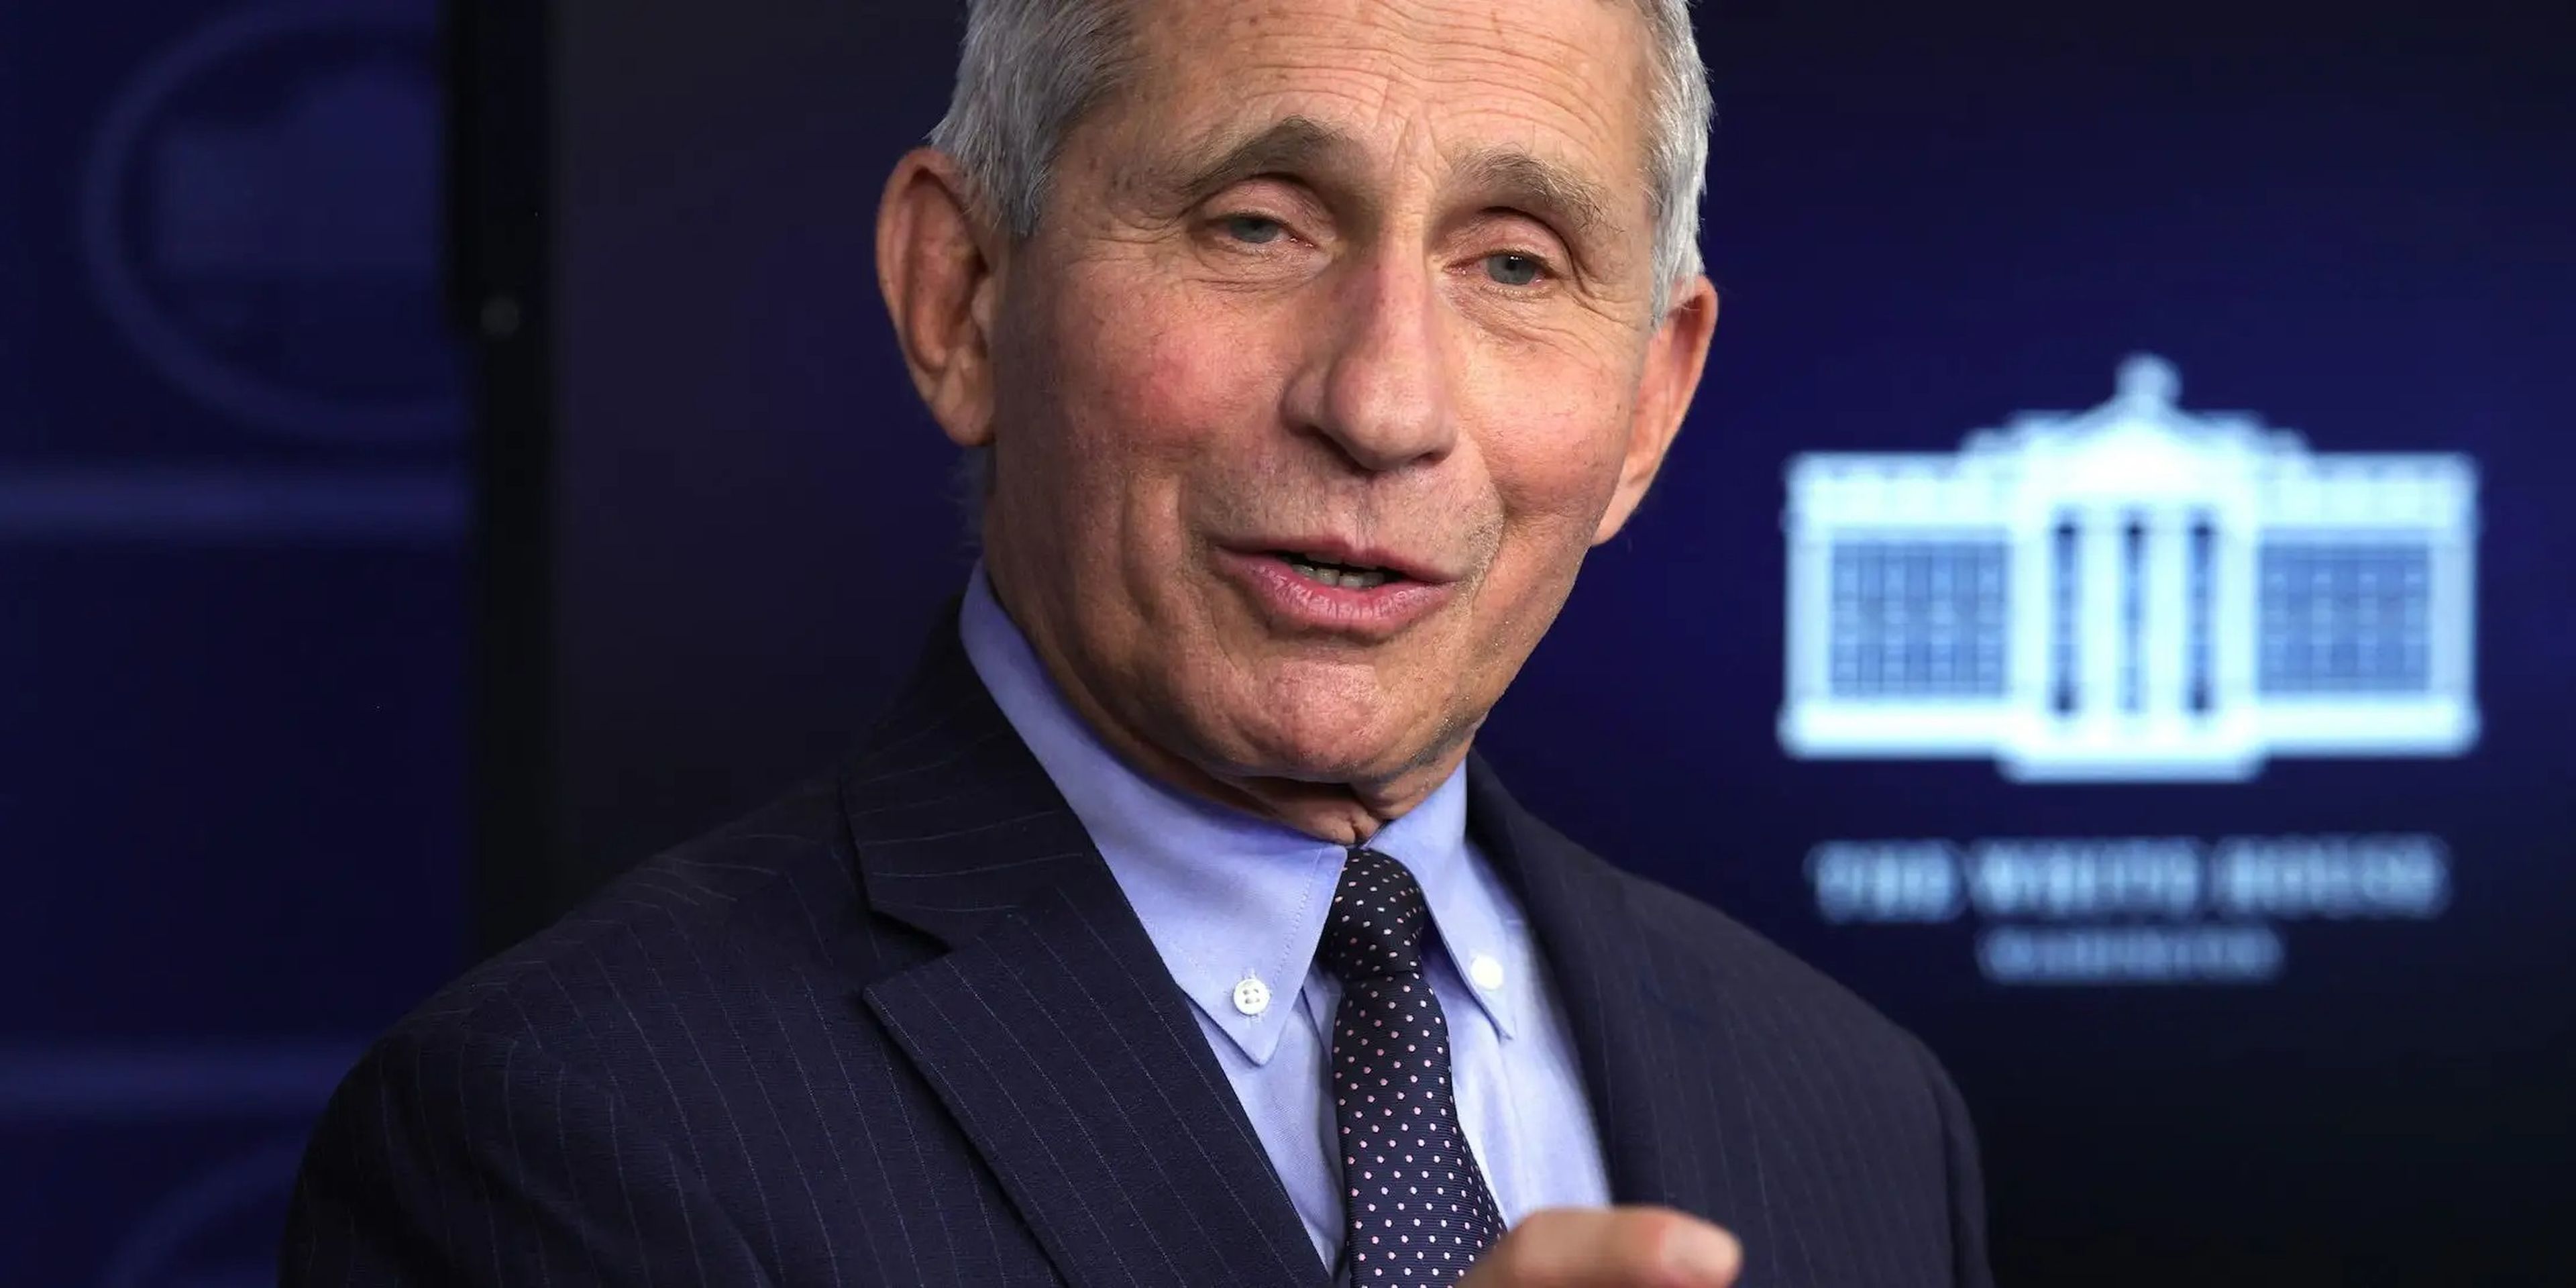 Dr Anthony Fauci, Director of the National Institute of Allergy and Infectious Diseases, during a White House press briefing on January 21, 2021 in Washington.